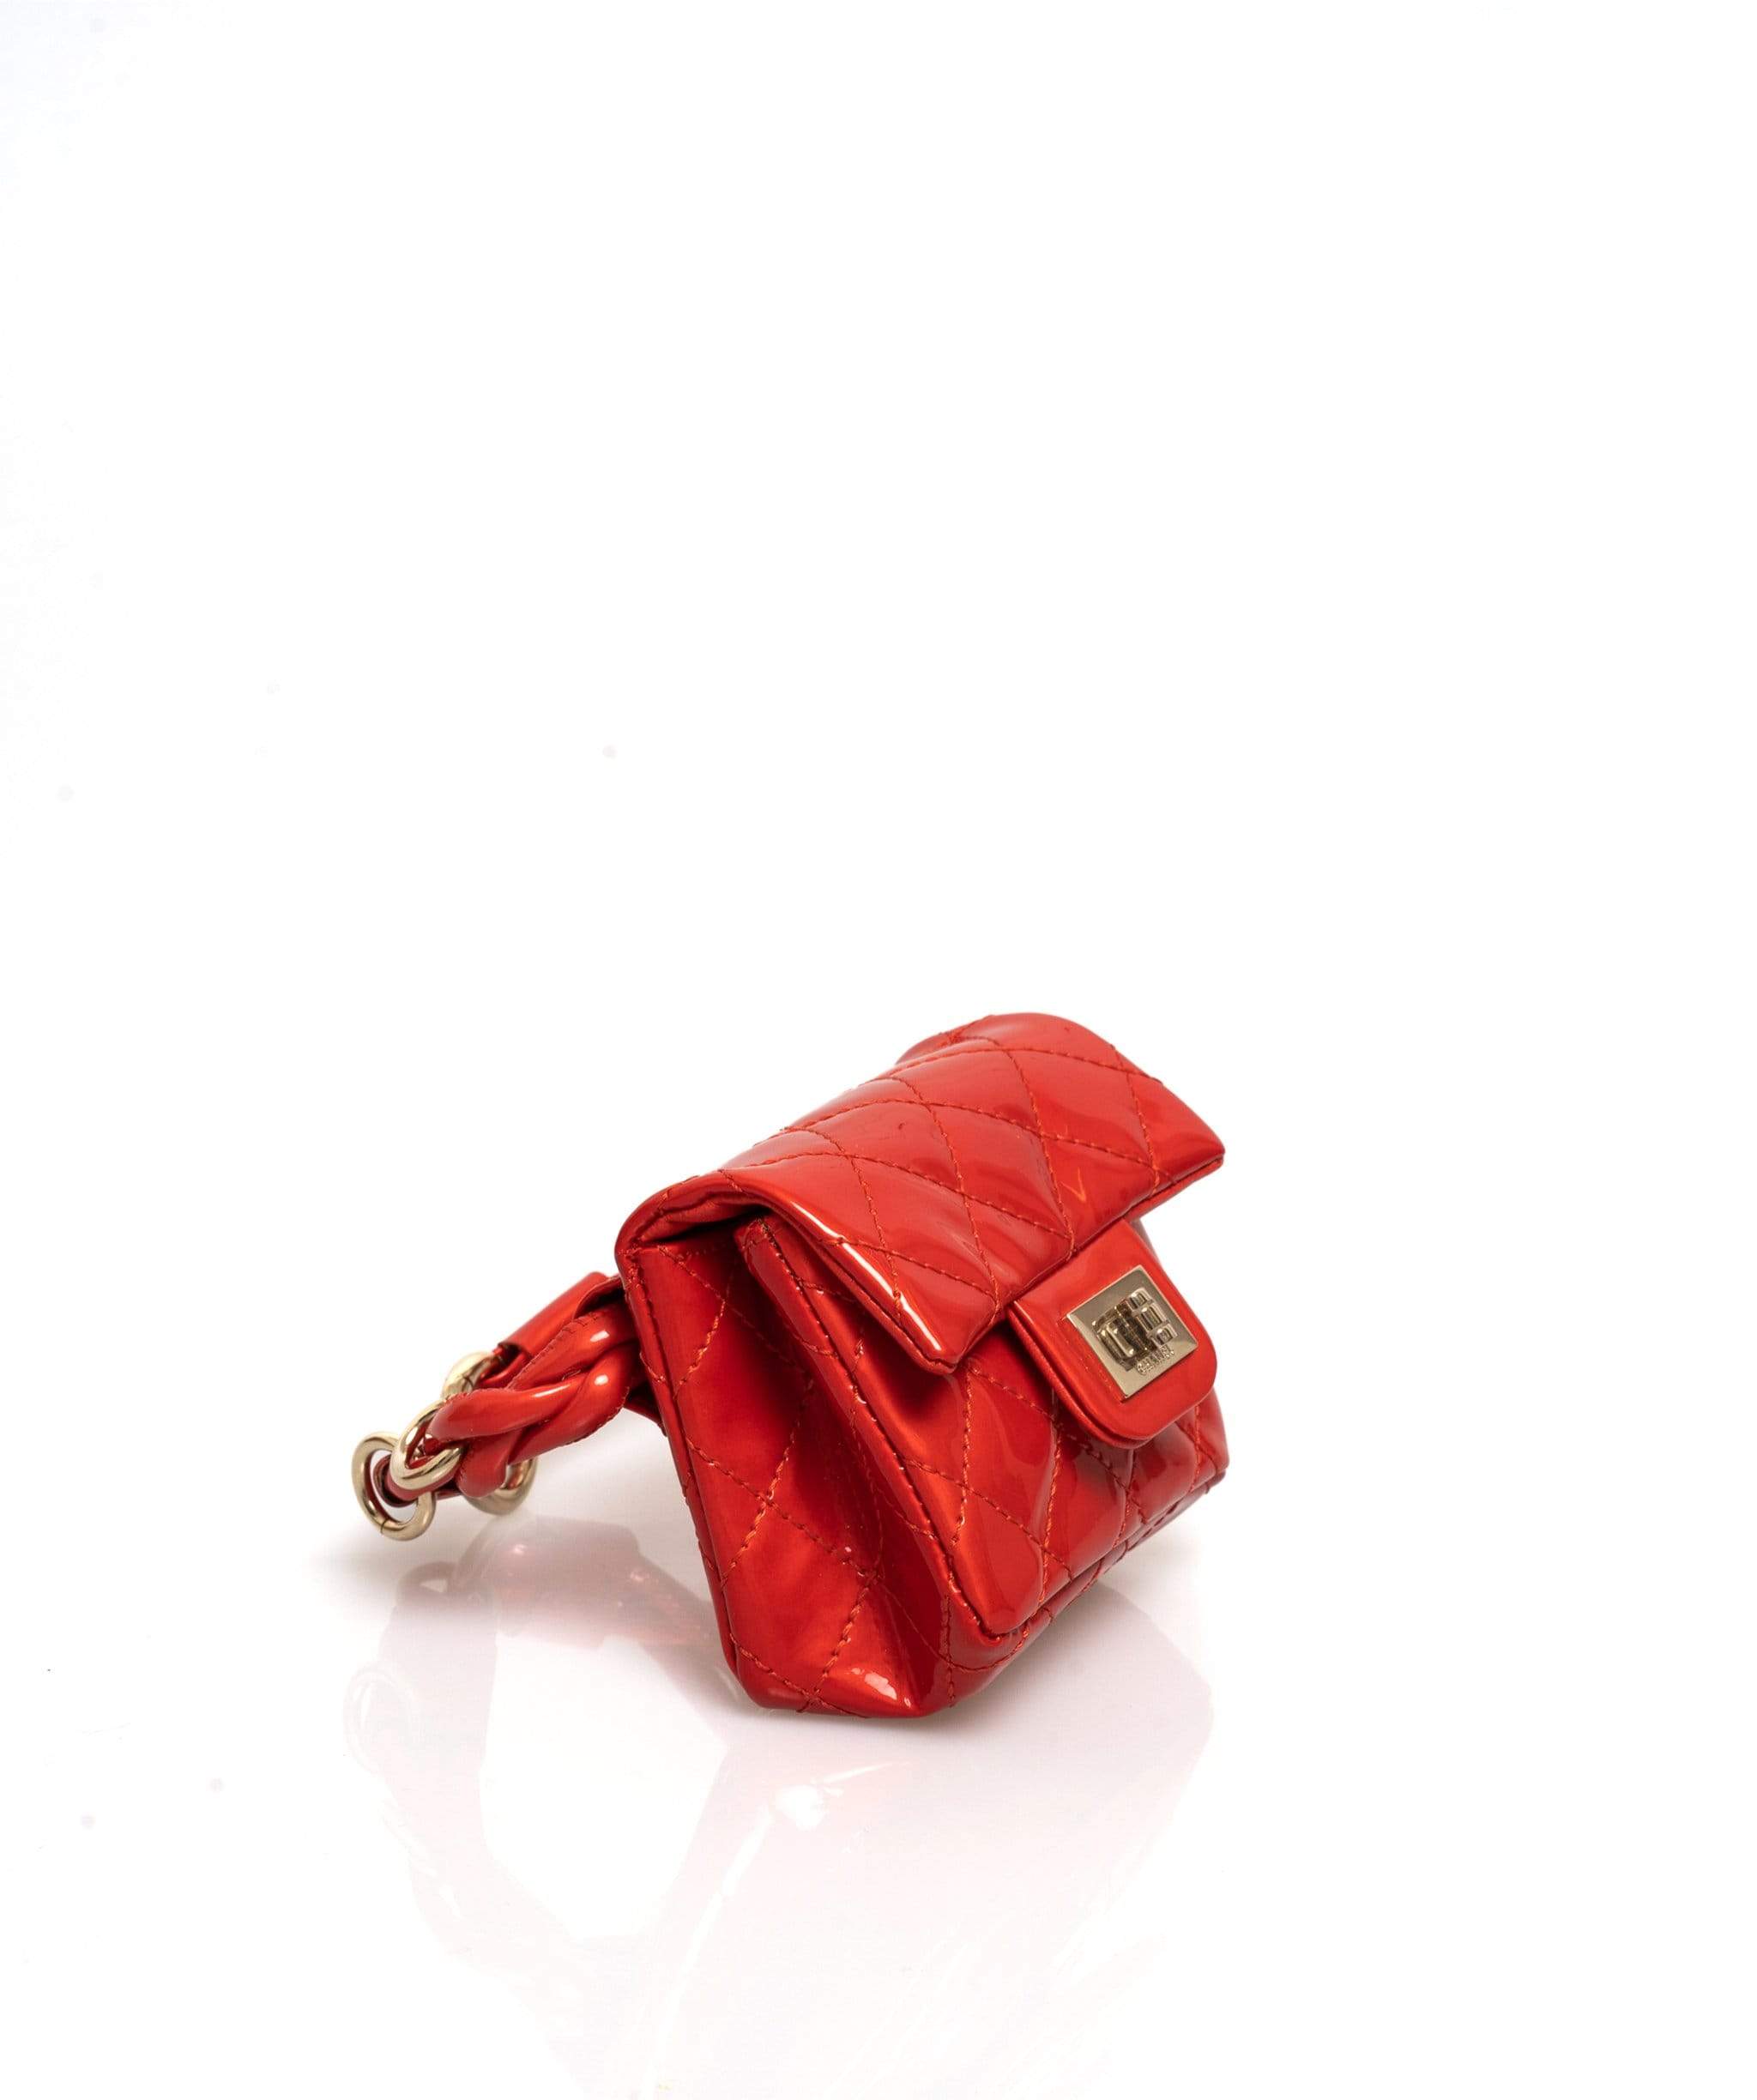 Chanel Chanel Micro Ankle Bag Red Patent GHW Vintage - ASL1663